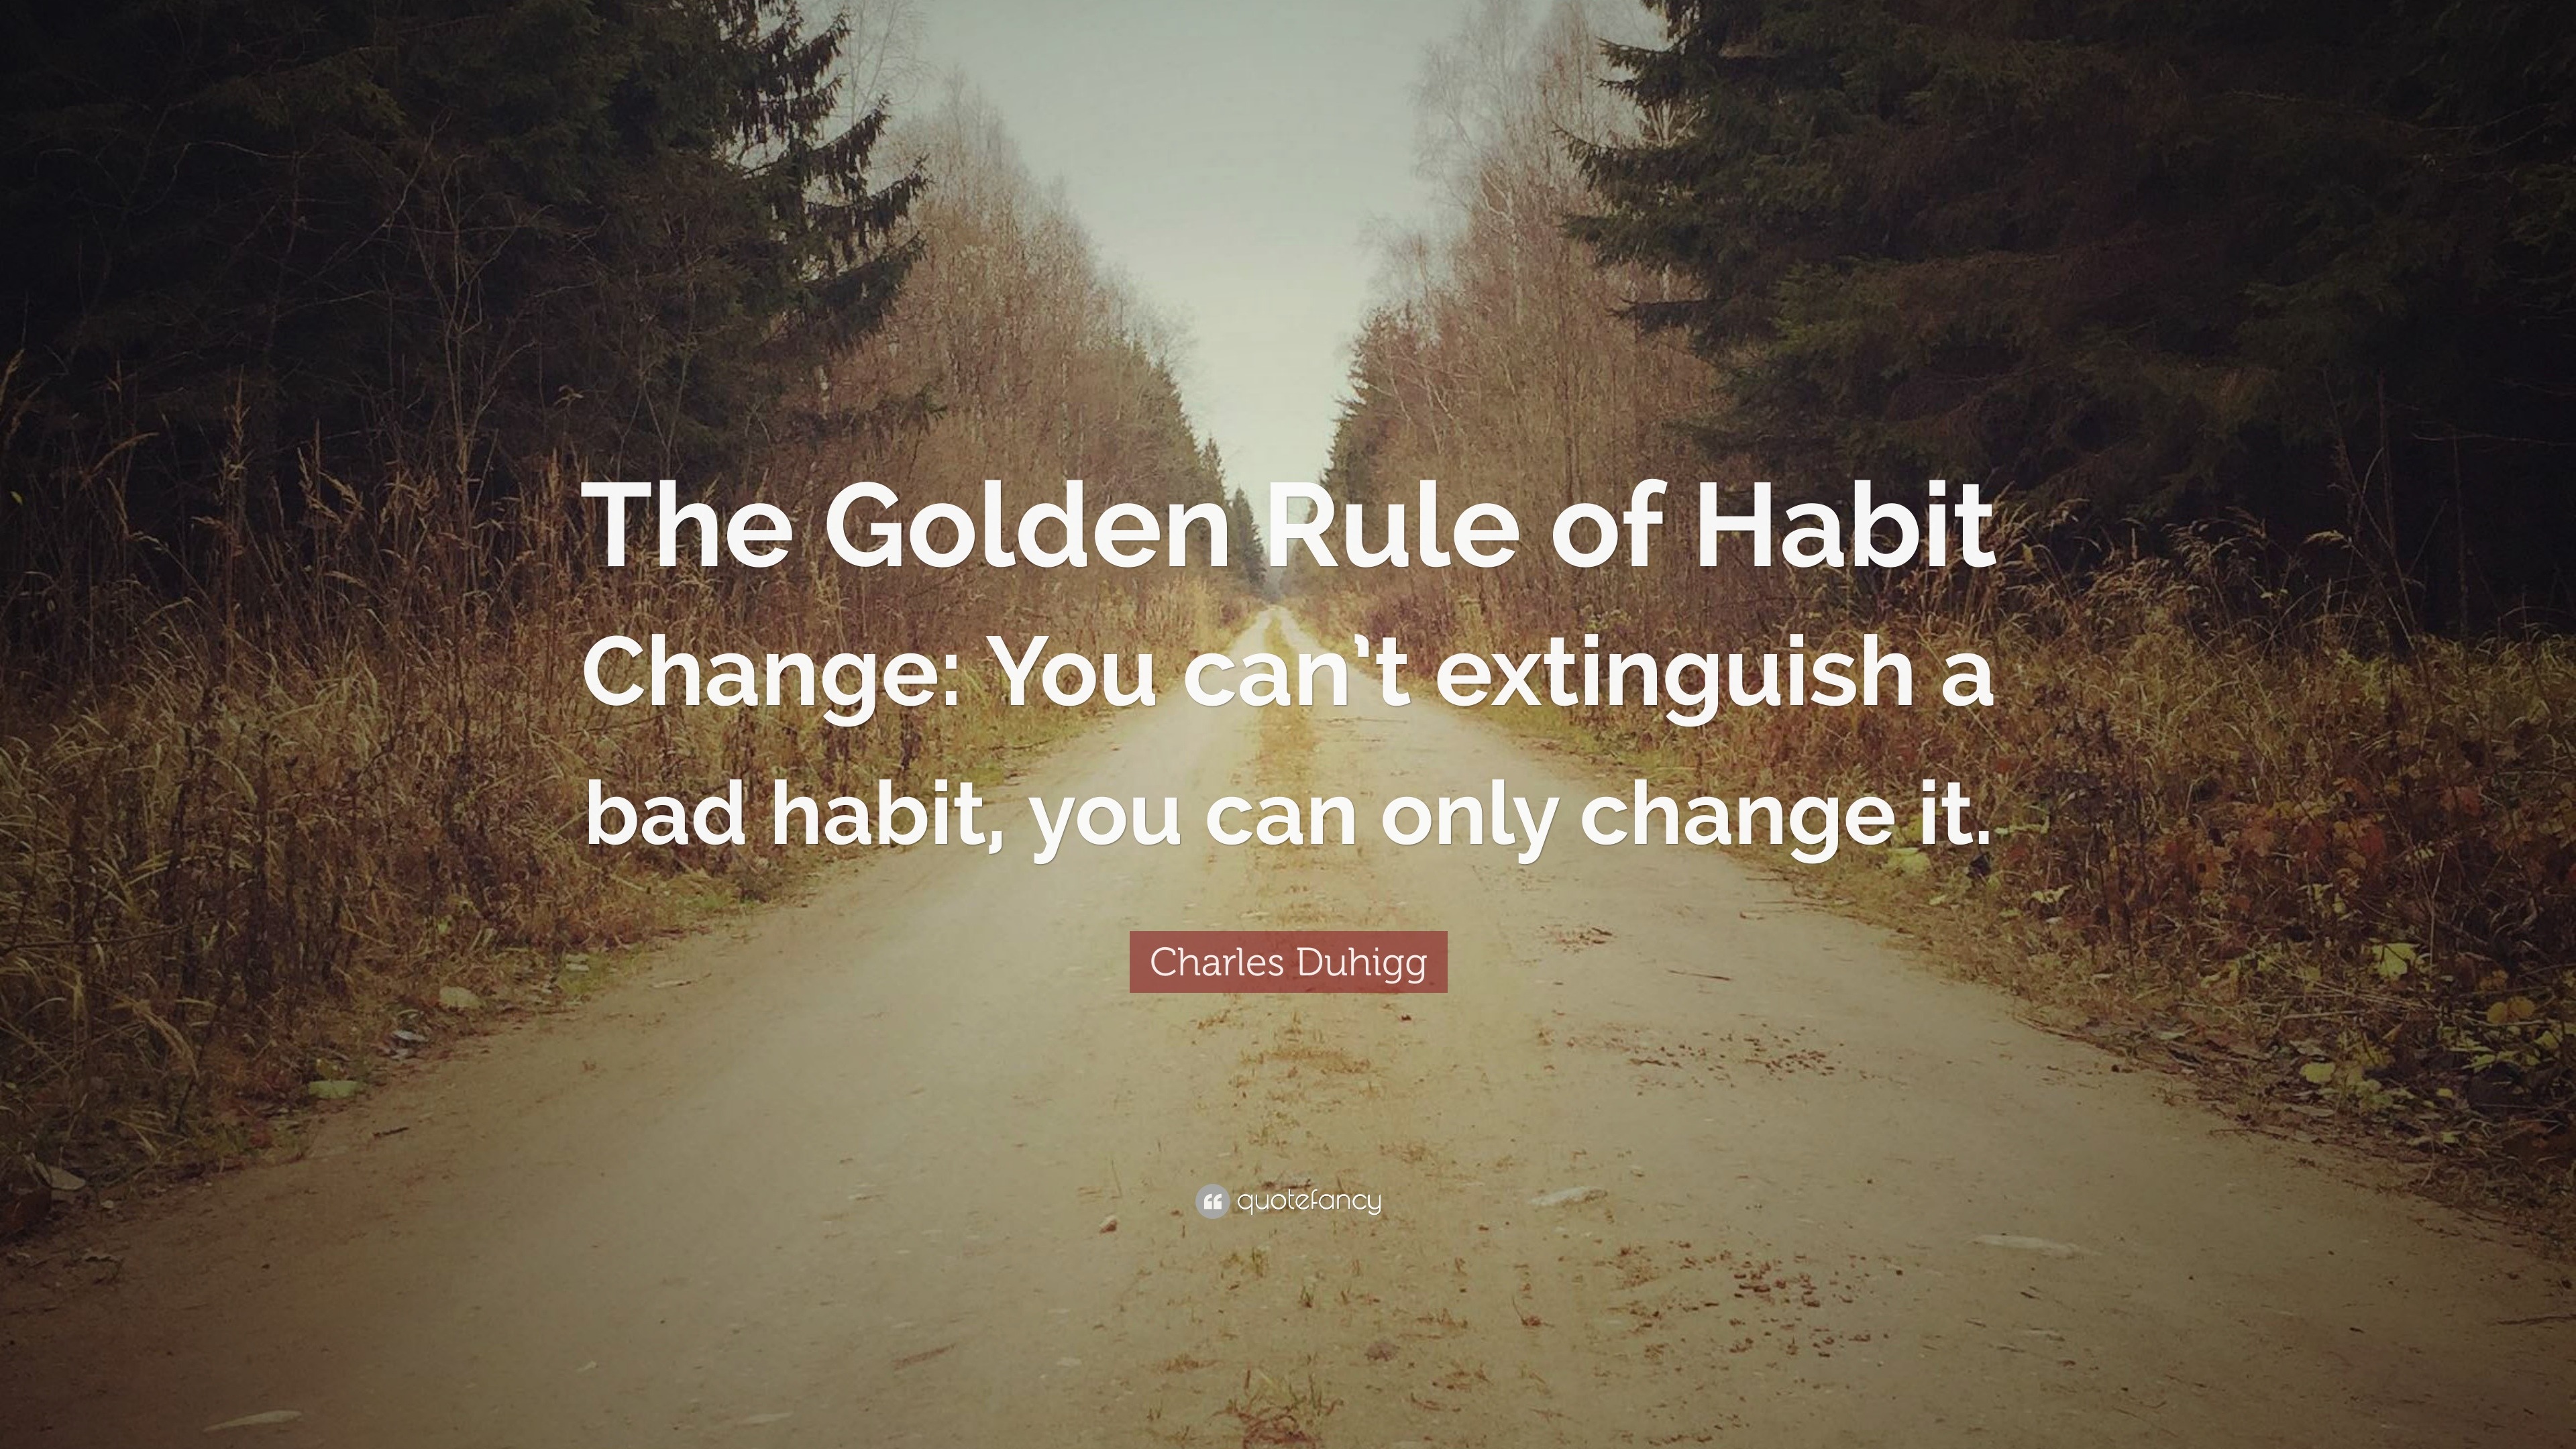 Charles Duhigg Quote: “The Golden Rule of Habit Change: You can’t